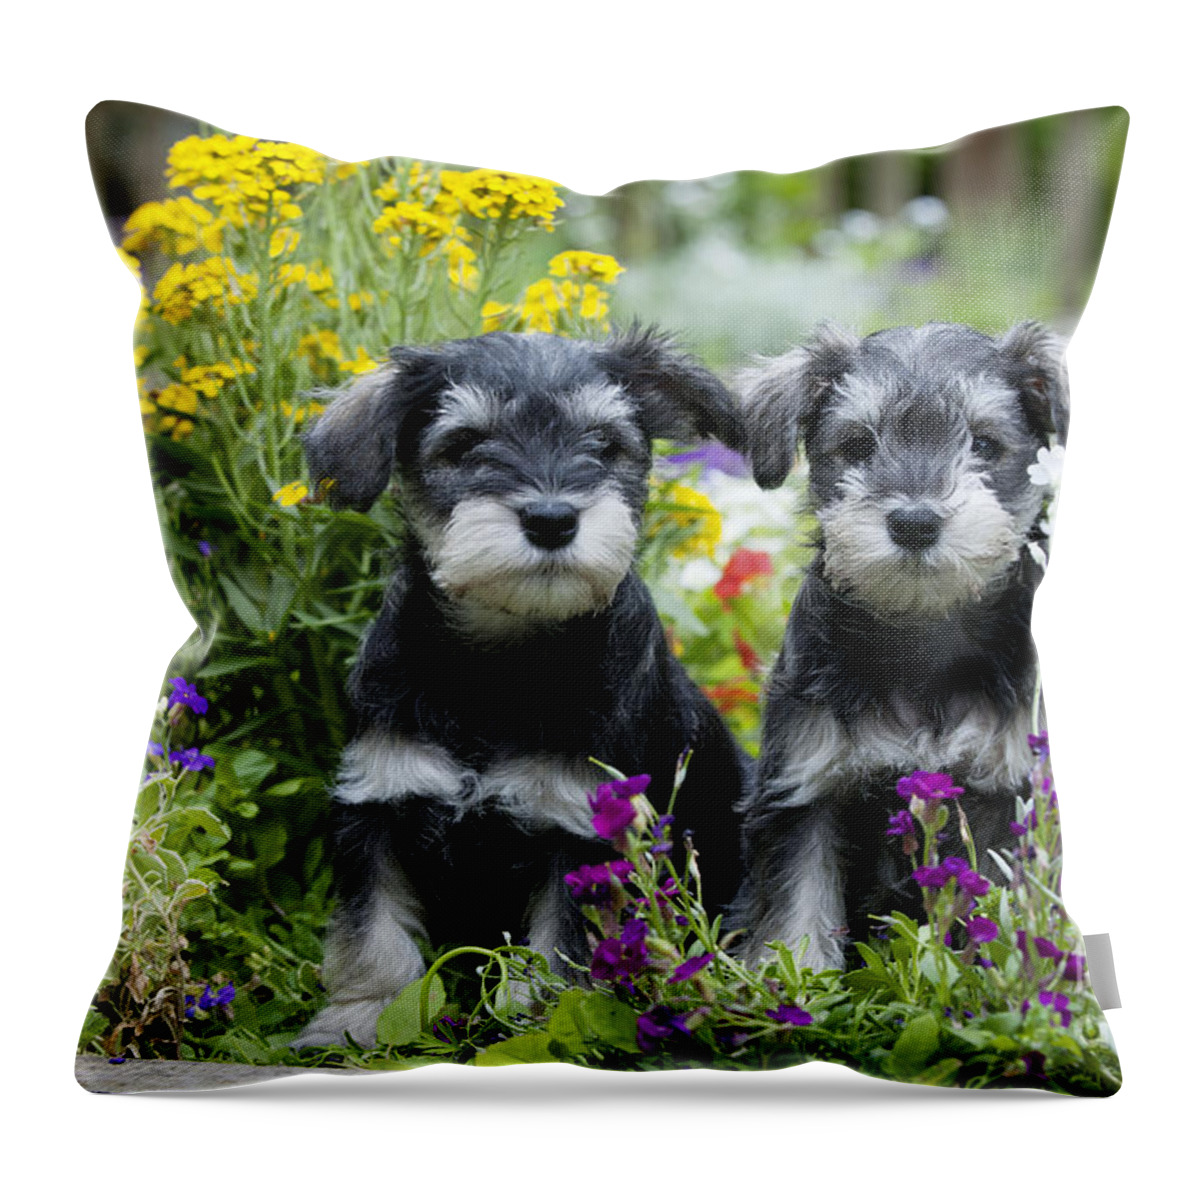 Dog Throw Pillow featuring the photograph Schnauzer Puppy Dogs by John Daniels